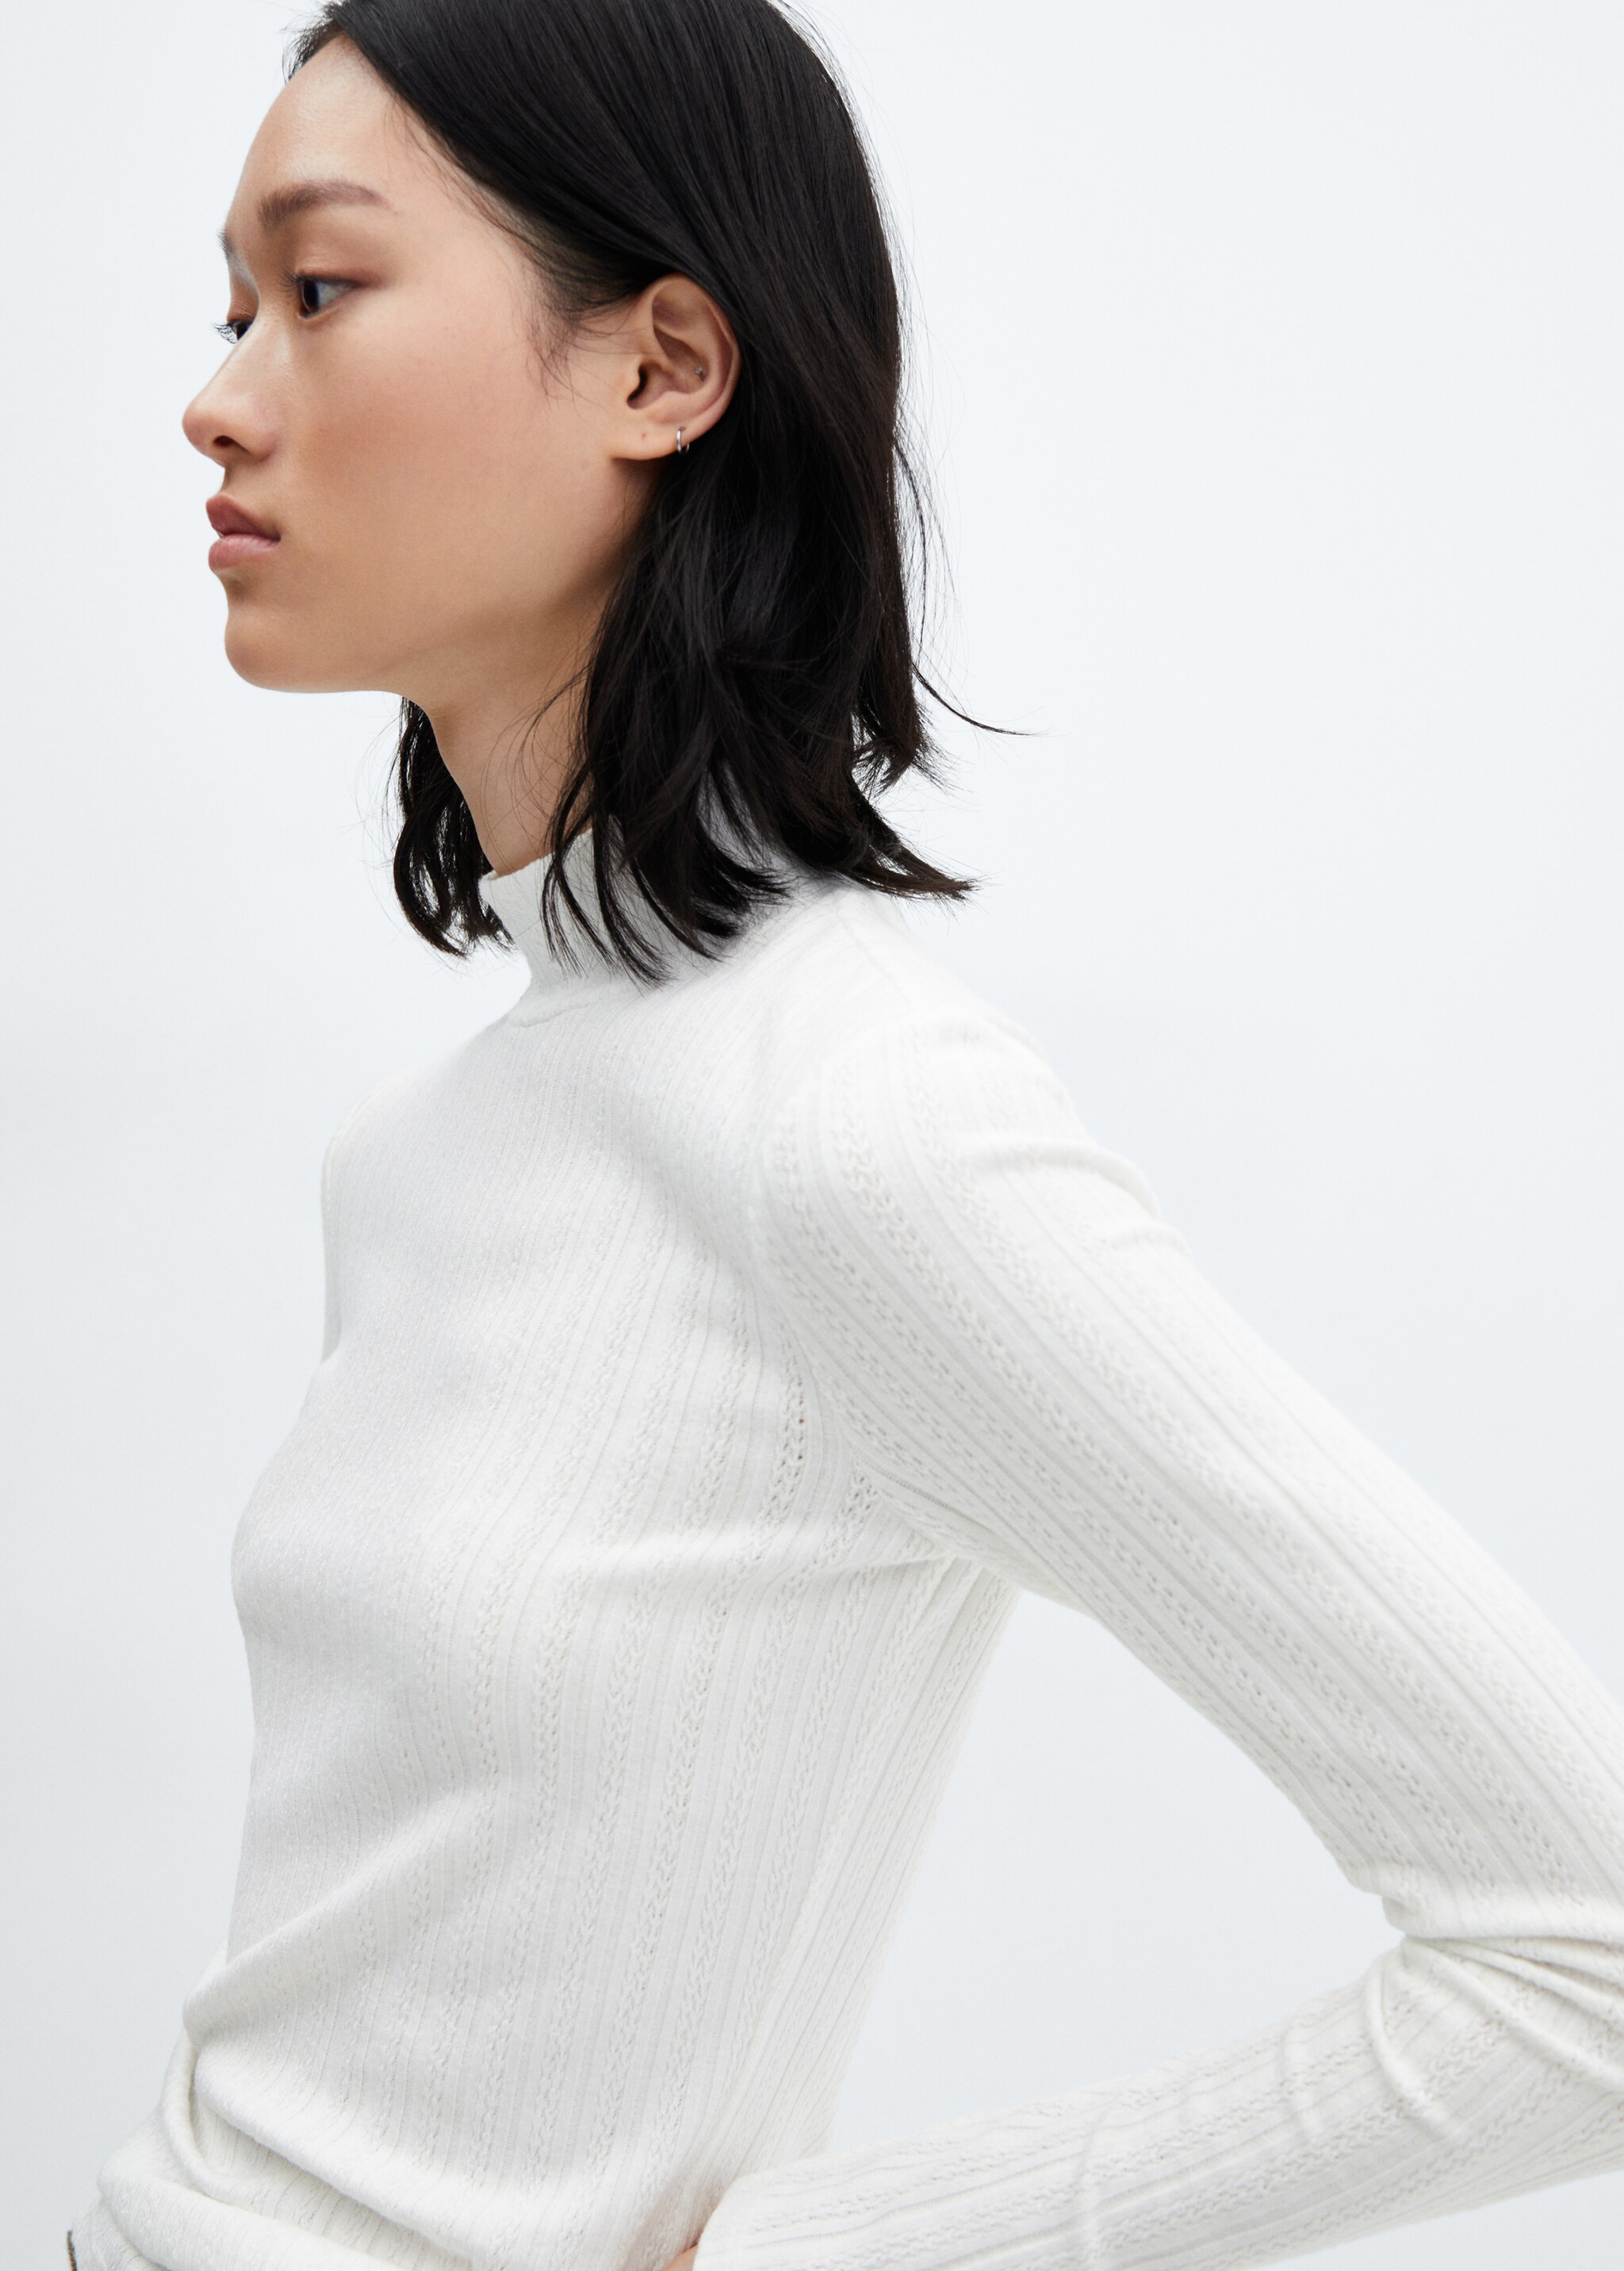 Textured knit t-shirt - Details of the article 1